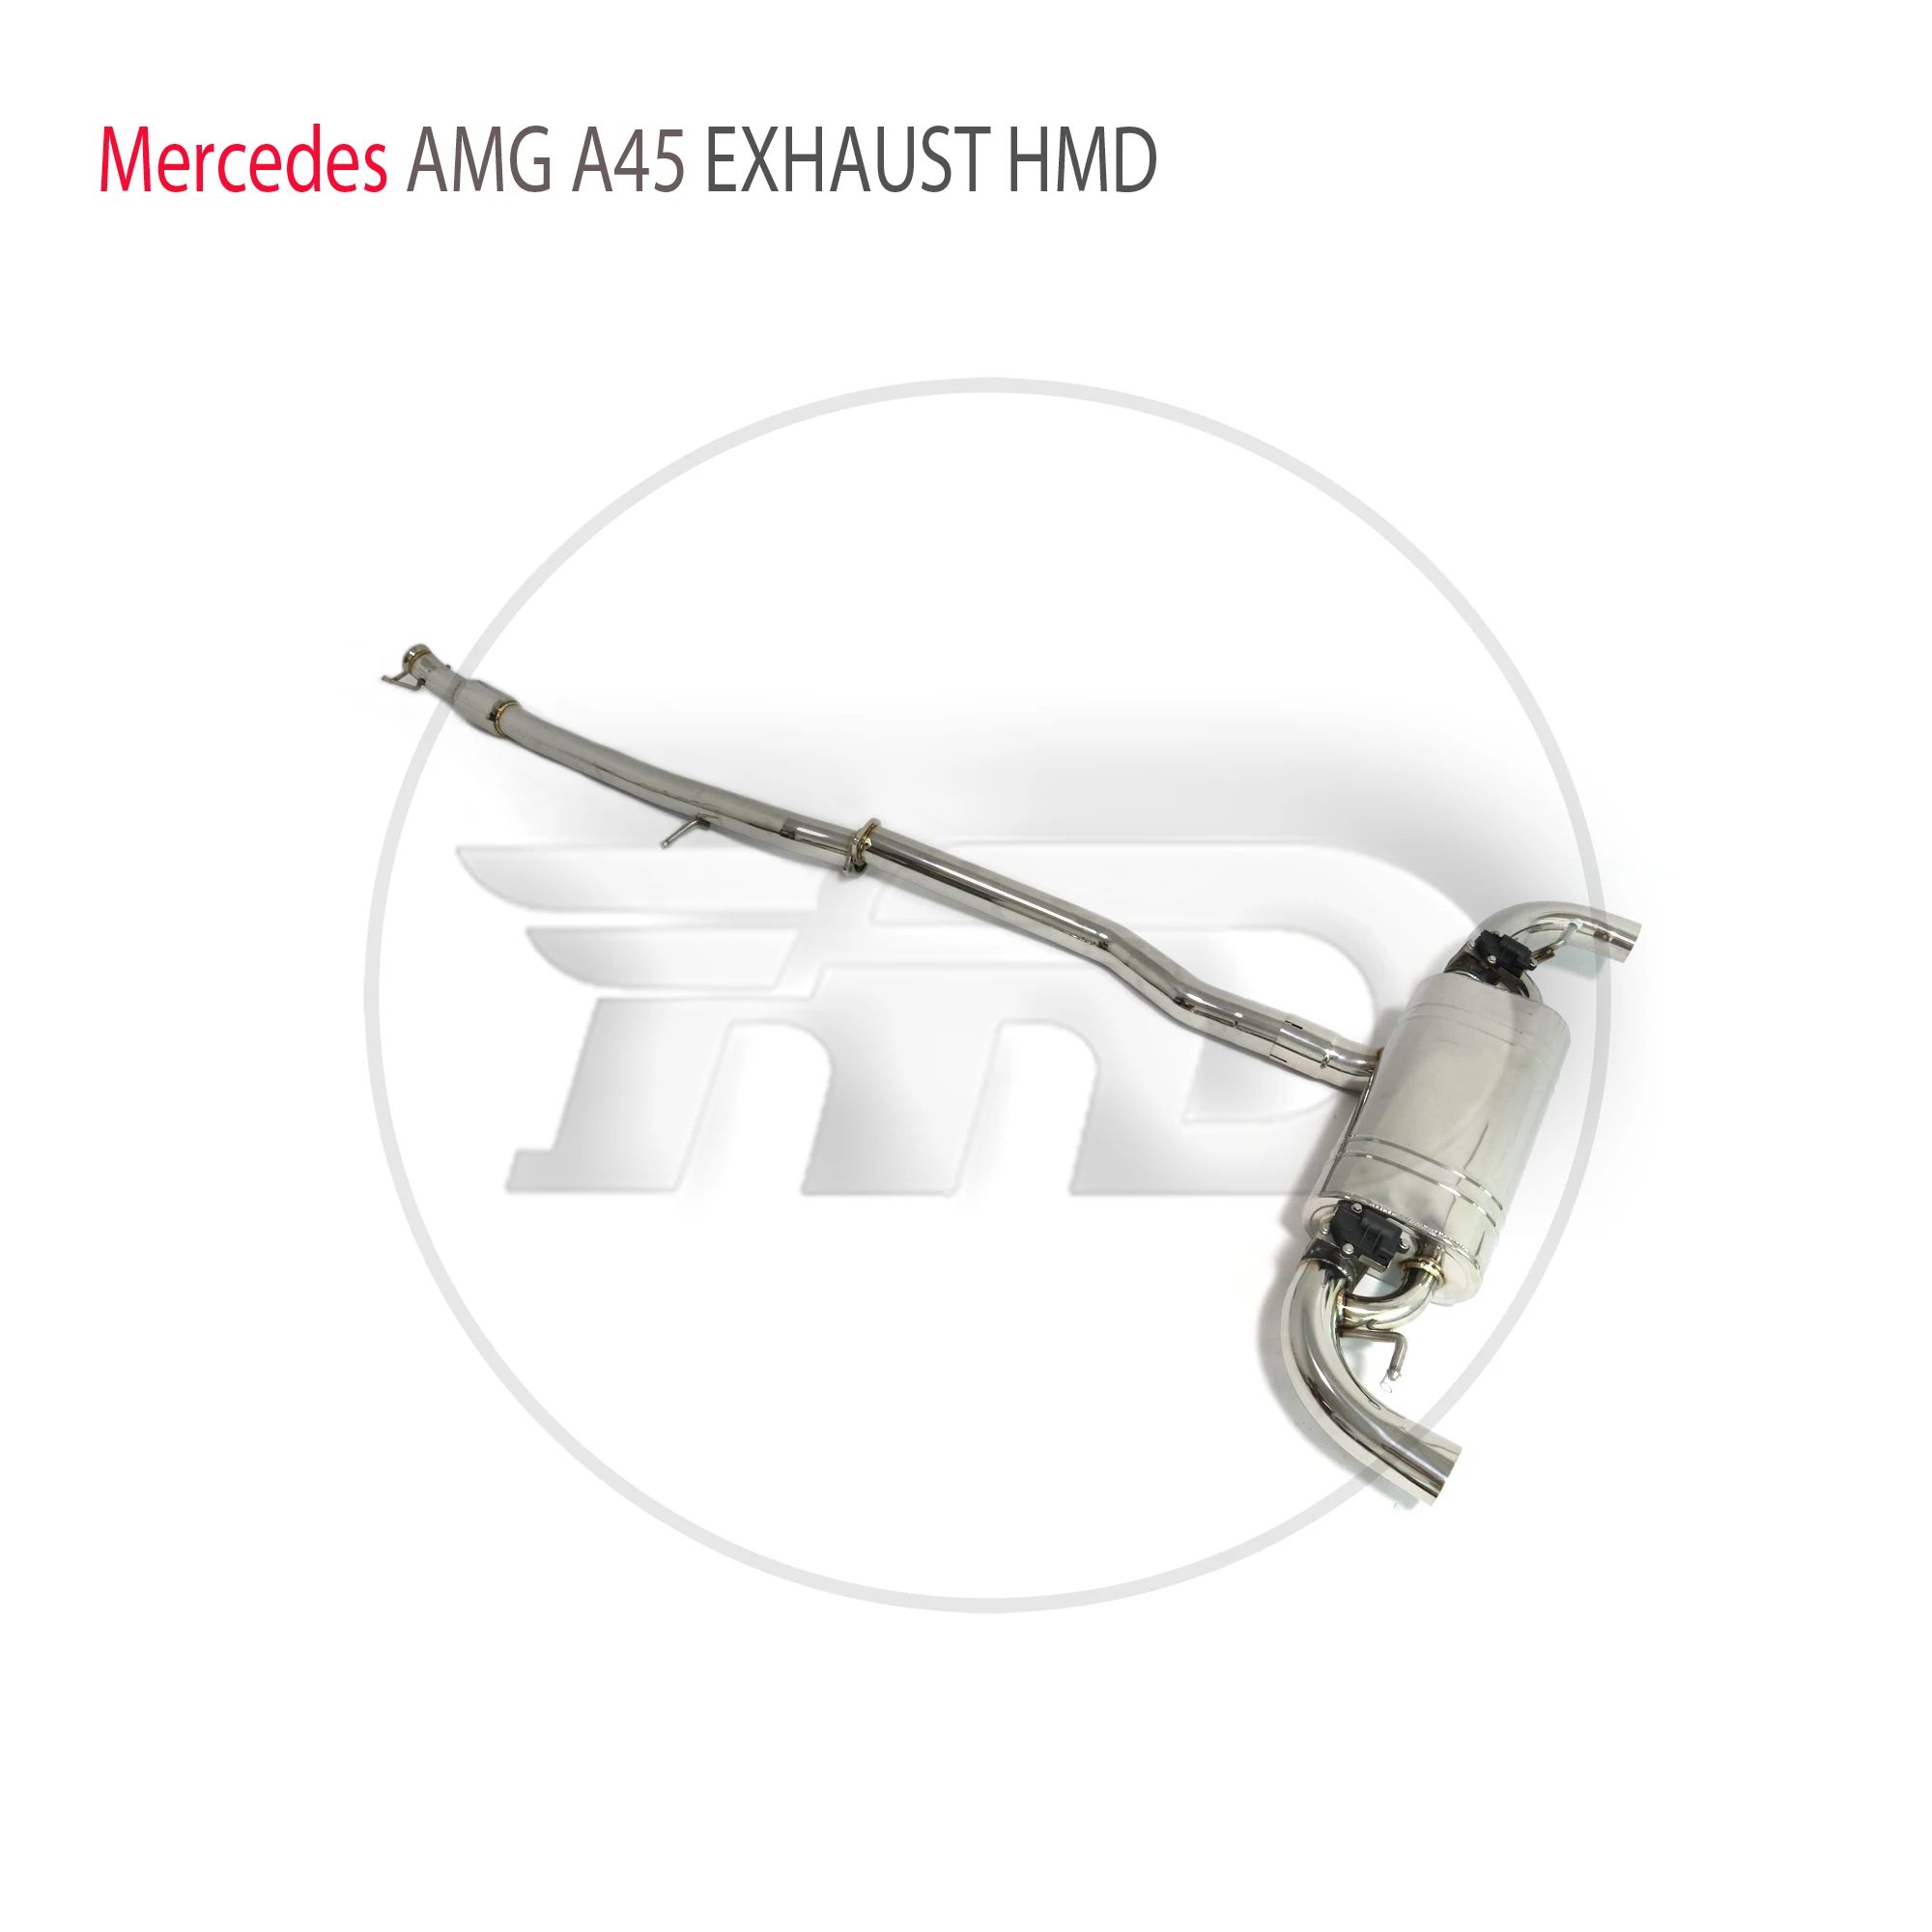 

HMD Stainless Steel Exhaust System Performance Catback for Mercedes Benz AMG A45 W176 Auto Accesorios Electronic Valve Muffler